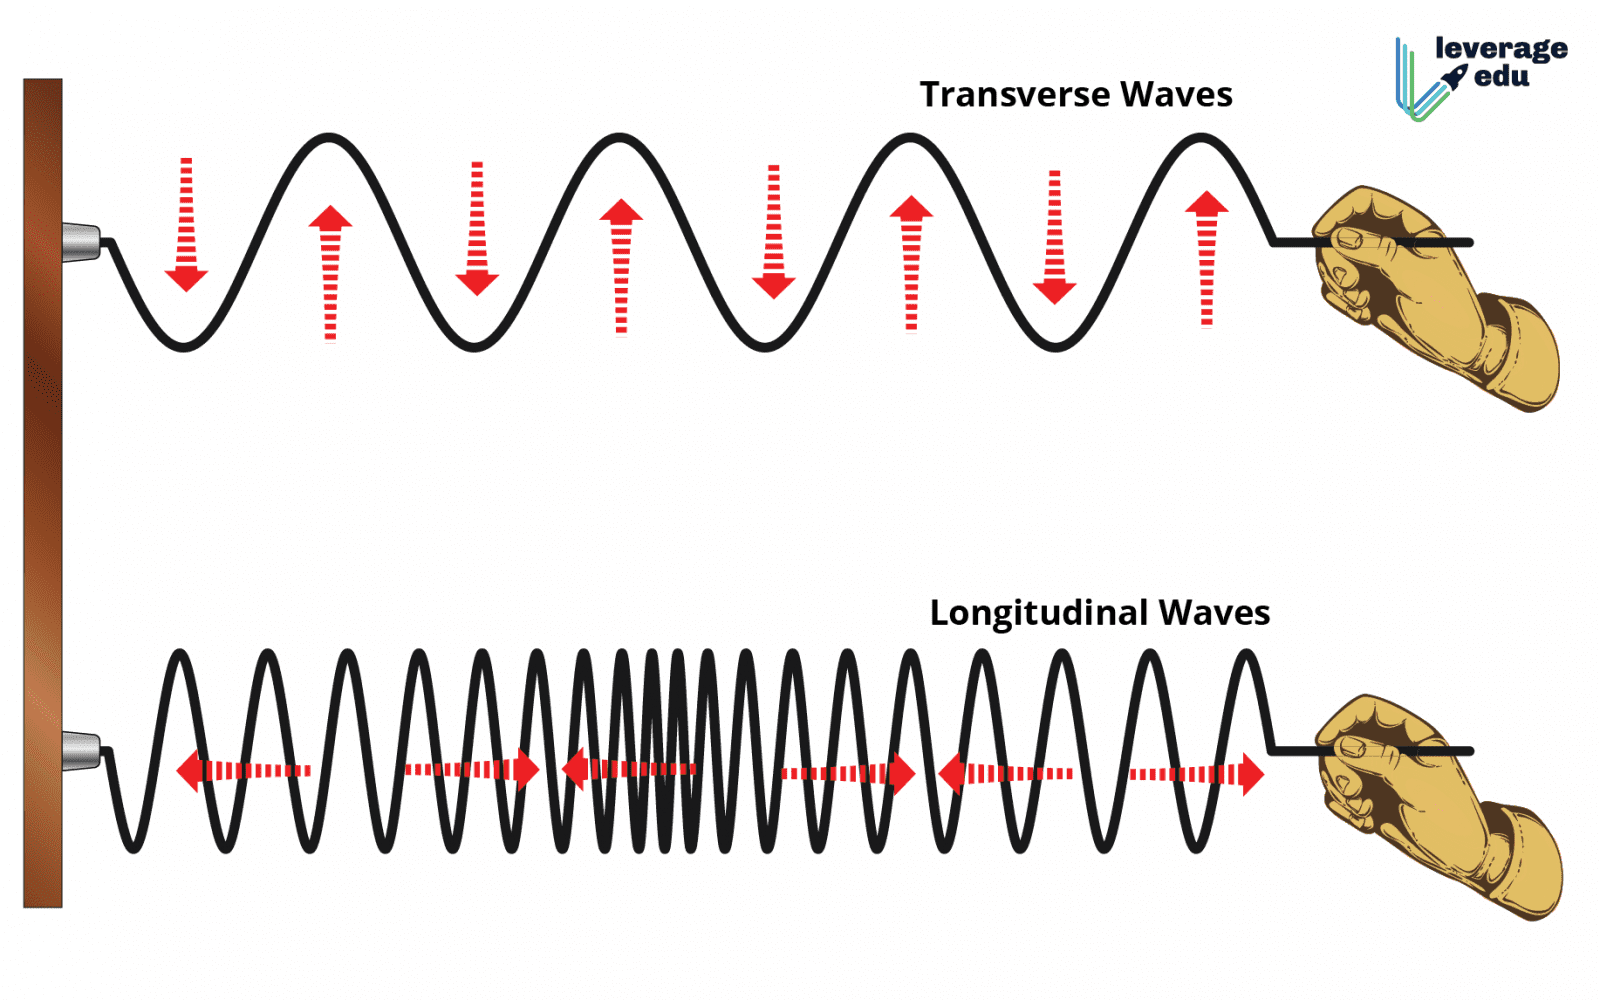 all waves travel up and down